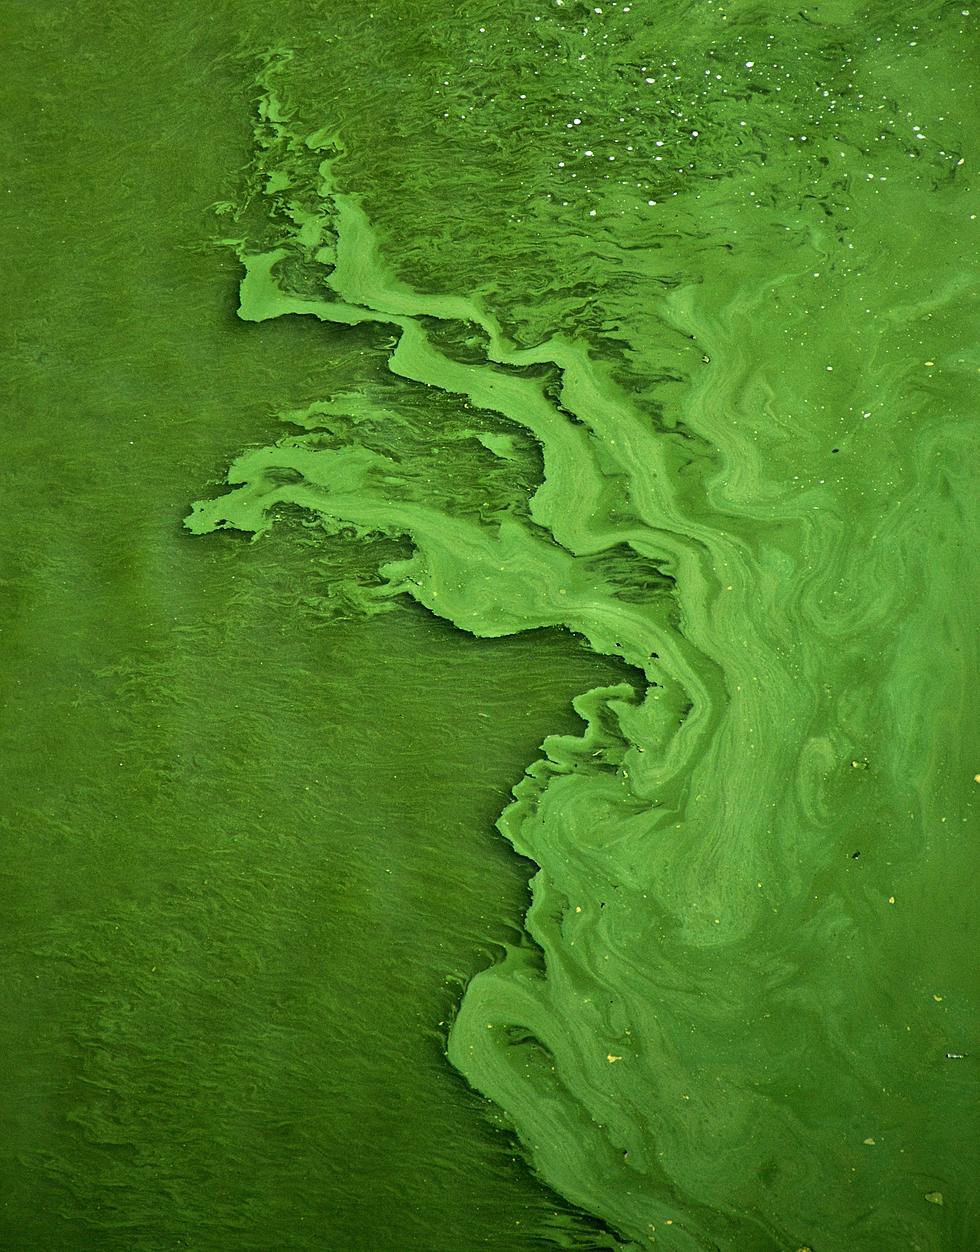 How to Find Out Where Dangerous Blue Algae Is in Montana’s Waters